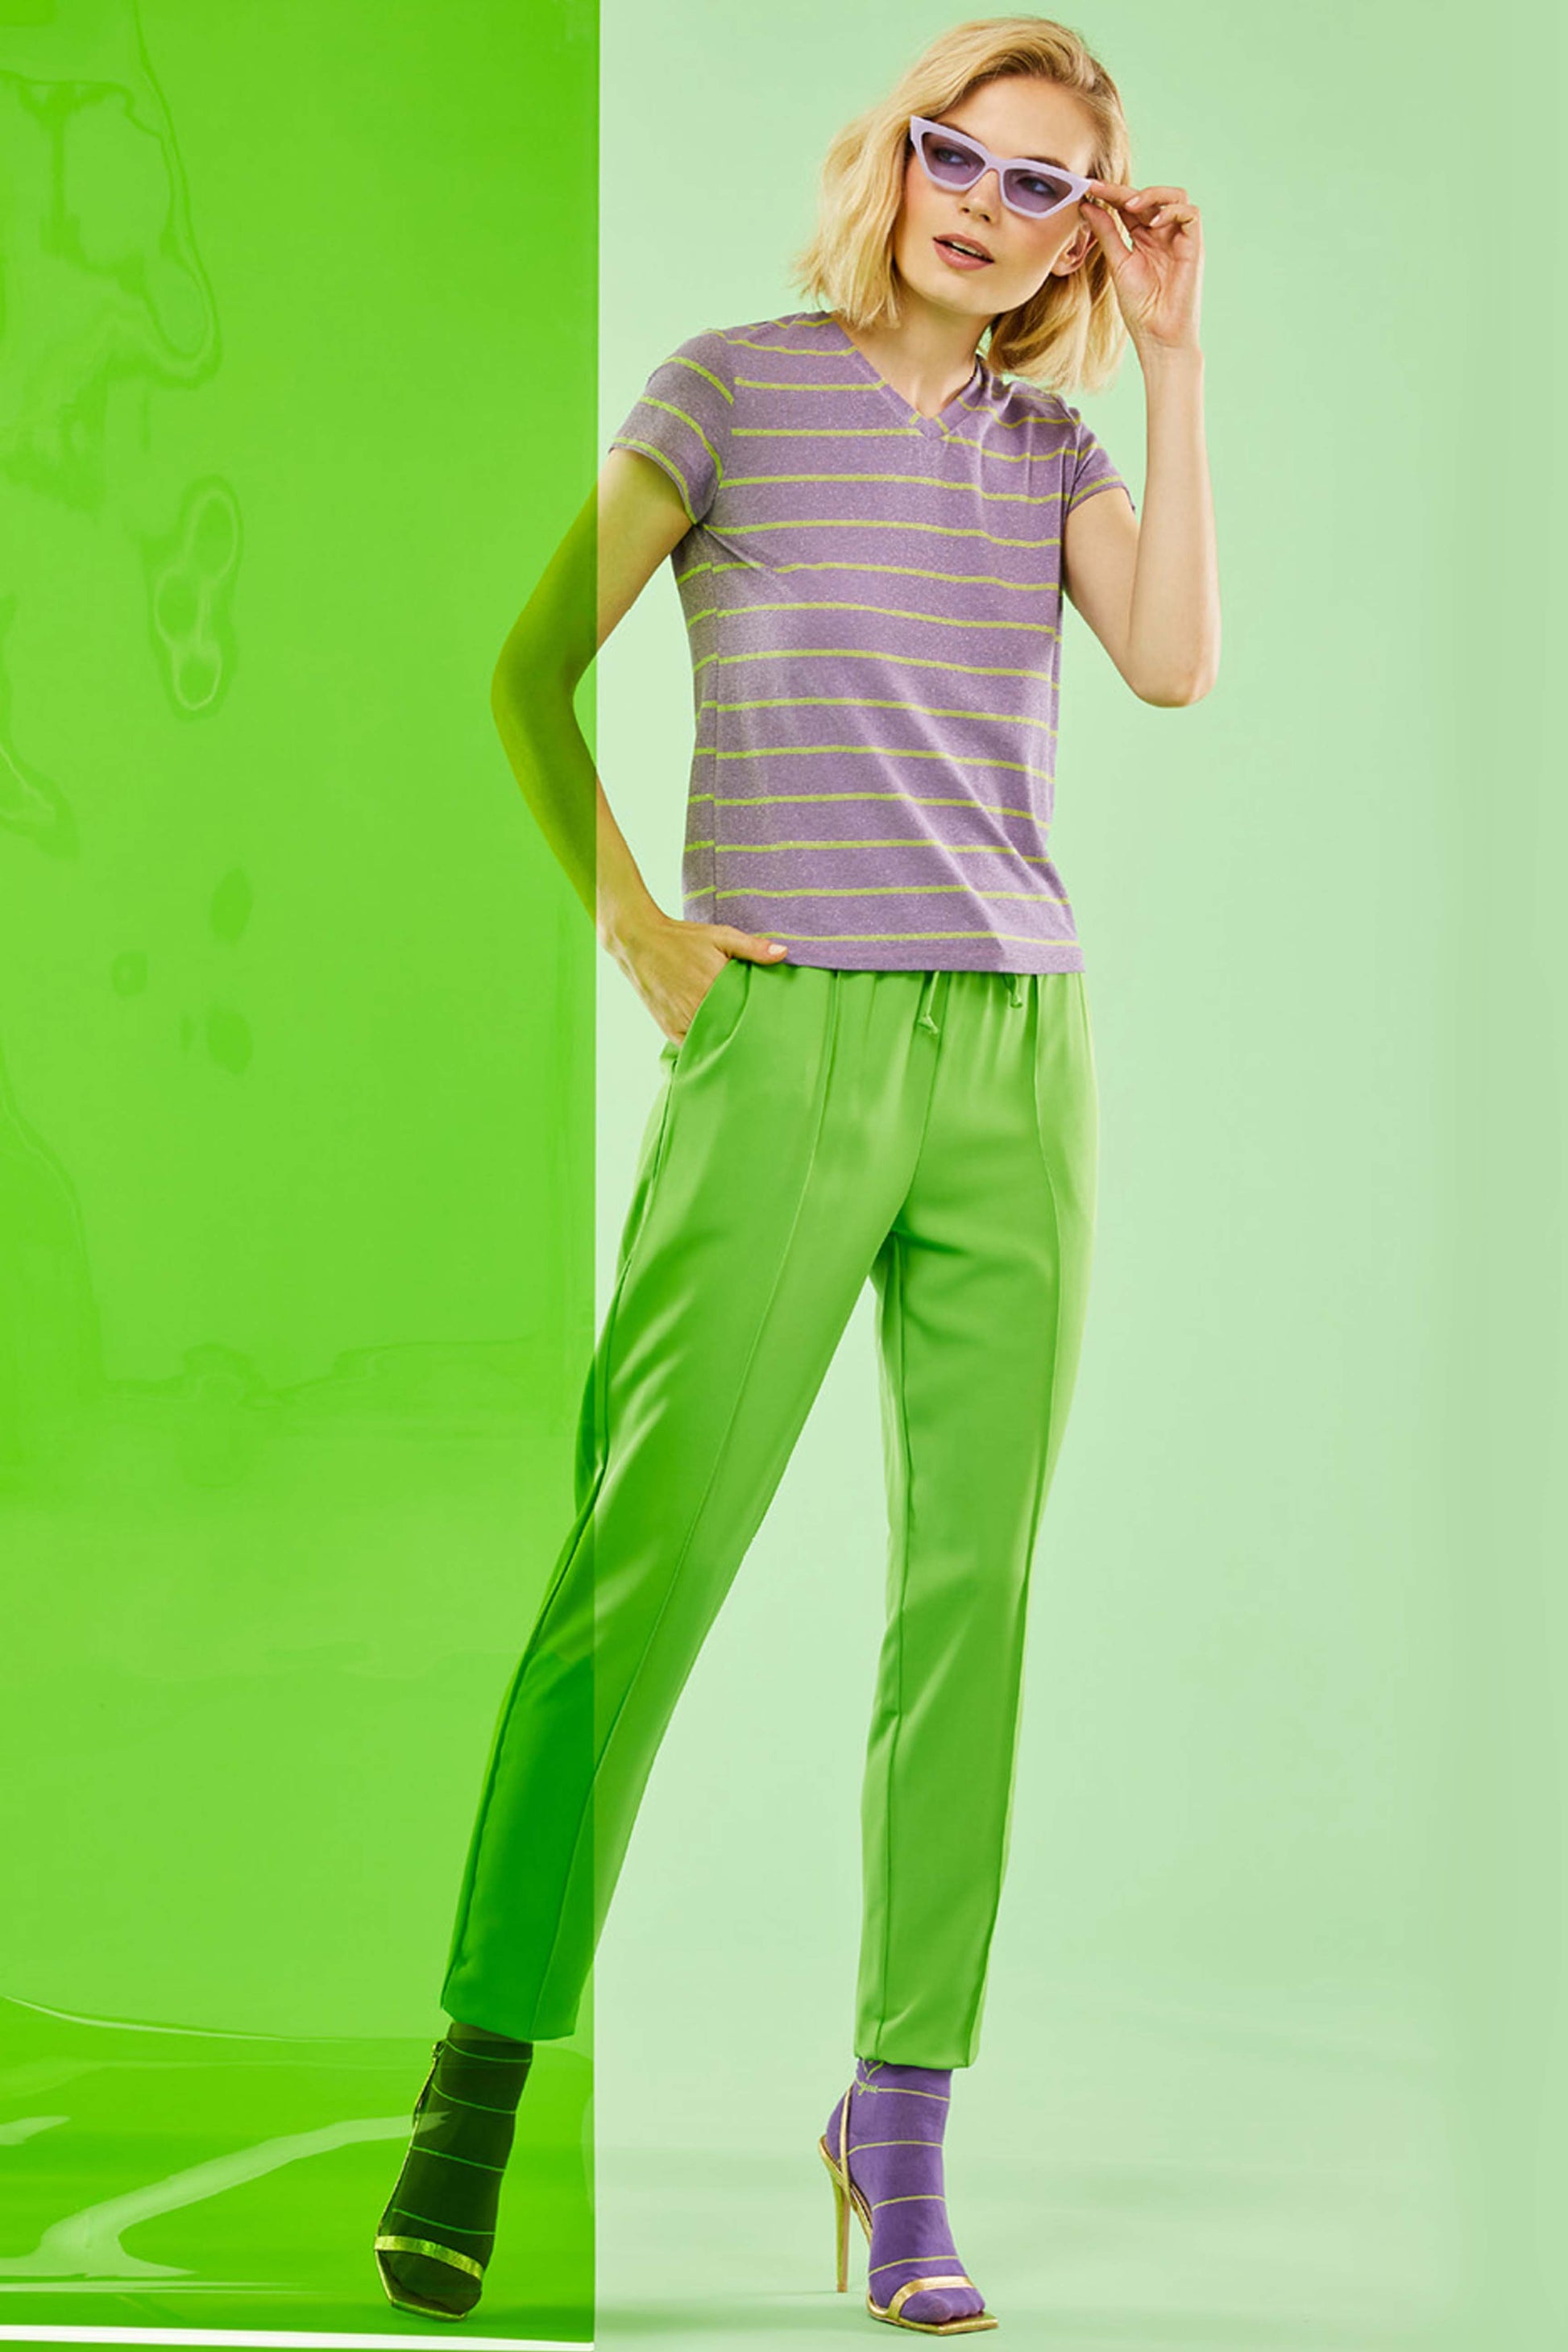 SiSi Swing Trouser - Bright lime green colour jogger style trousers with drawstring waist, side pockets and raised centre seam down the front of the leg. Worn with a purple stripe t-shirt and socks.